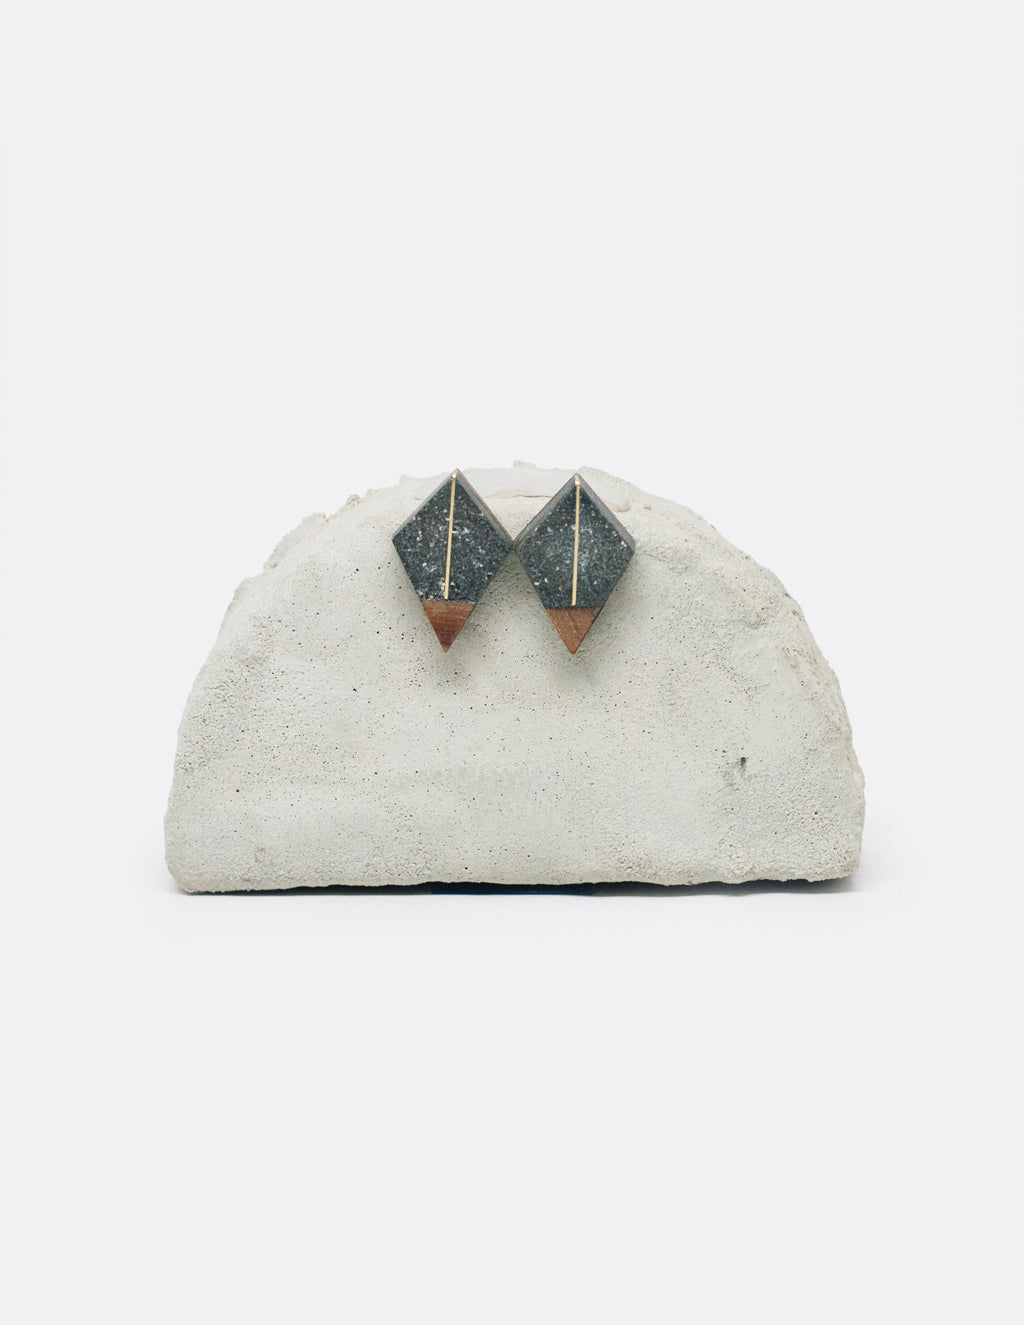 Yomo Studio line to triangle earrings. Materials include: concrete, brass, and walnut wood.